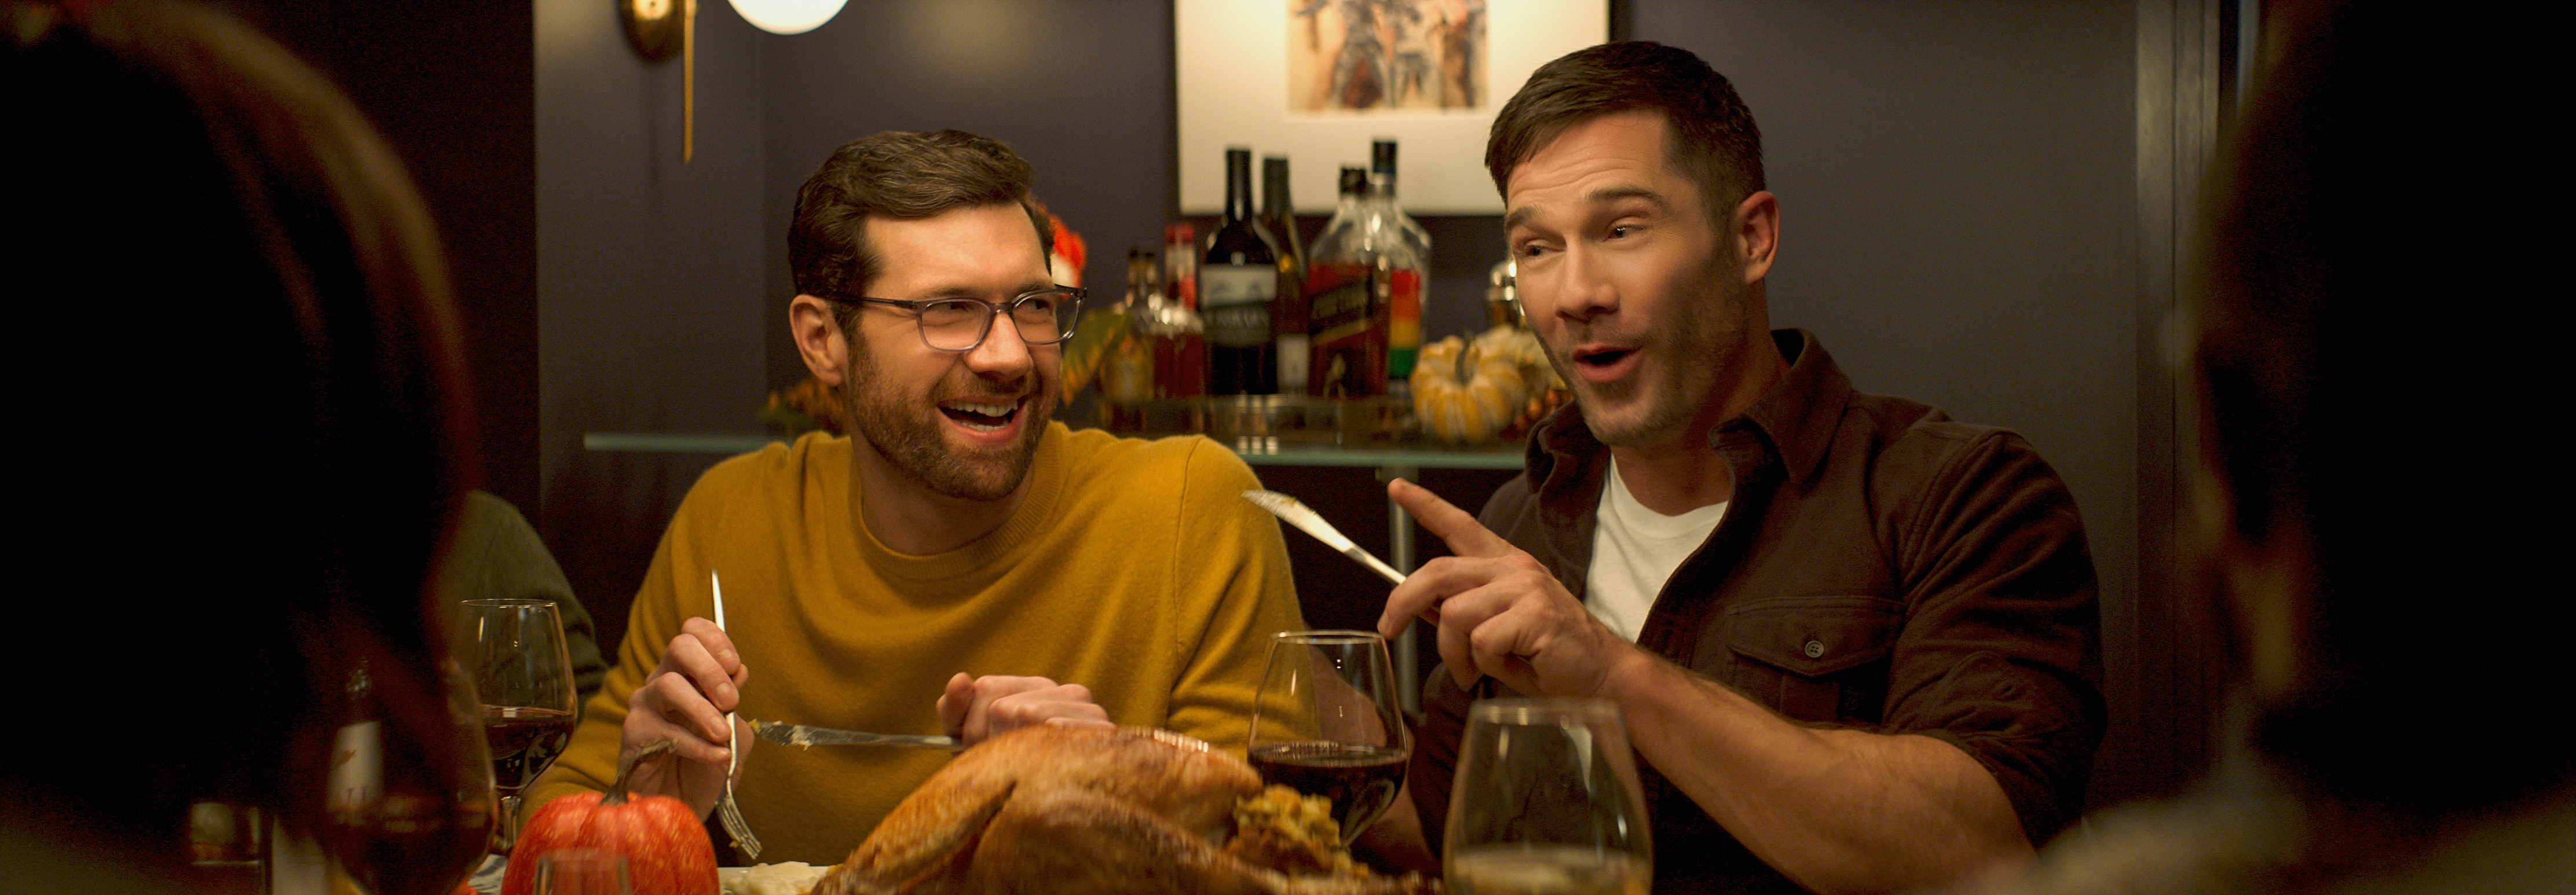 Billy Eichner and Luke Macfarlane, finding love in 'Bros' (Courtesy of Universal Pictures)